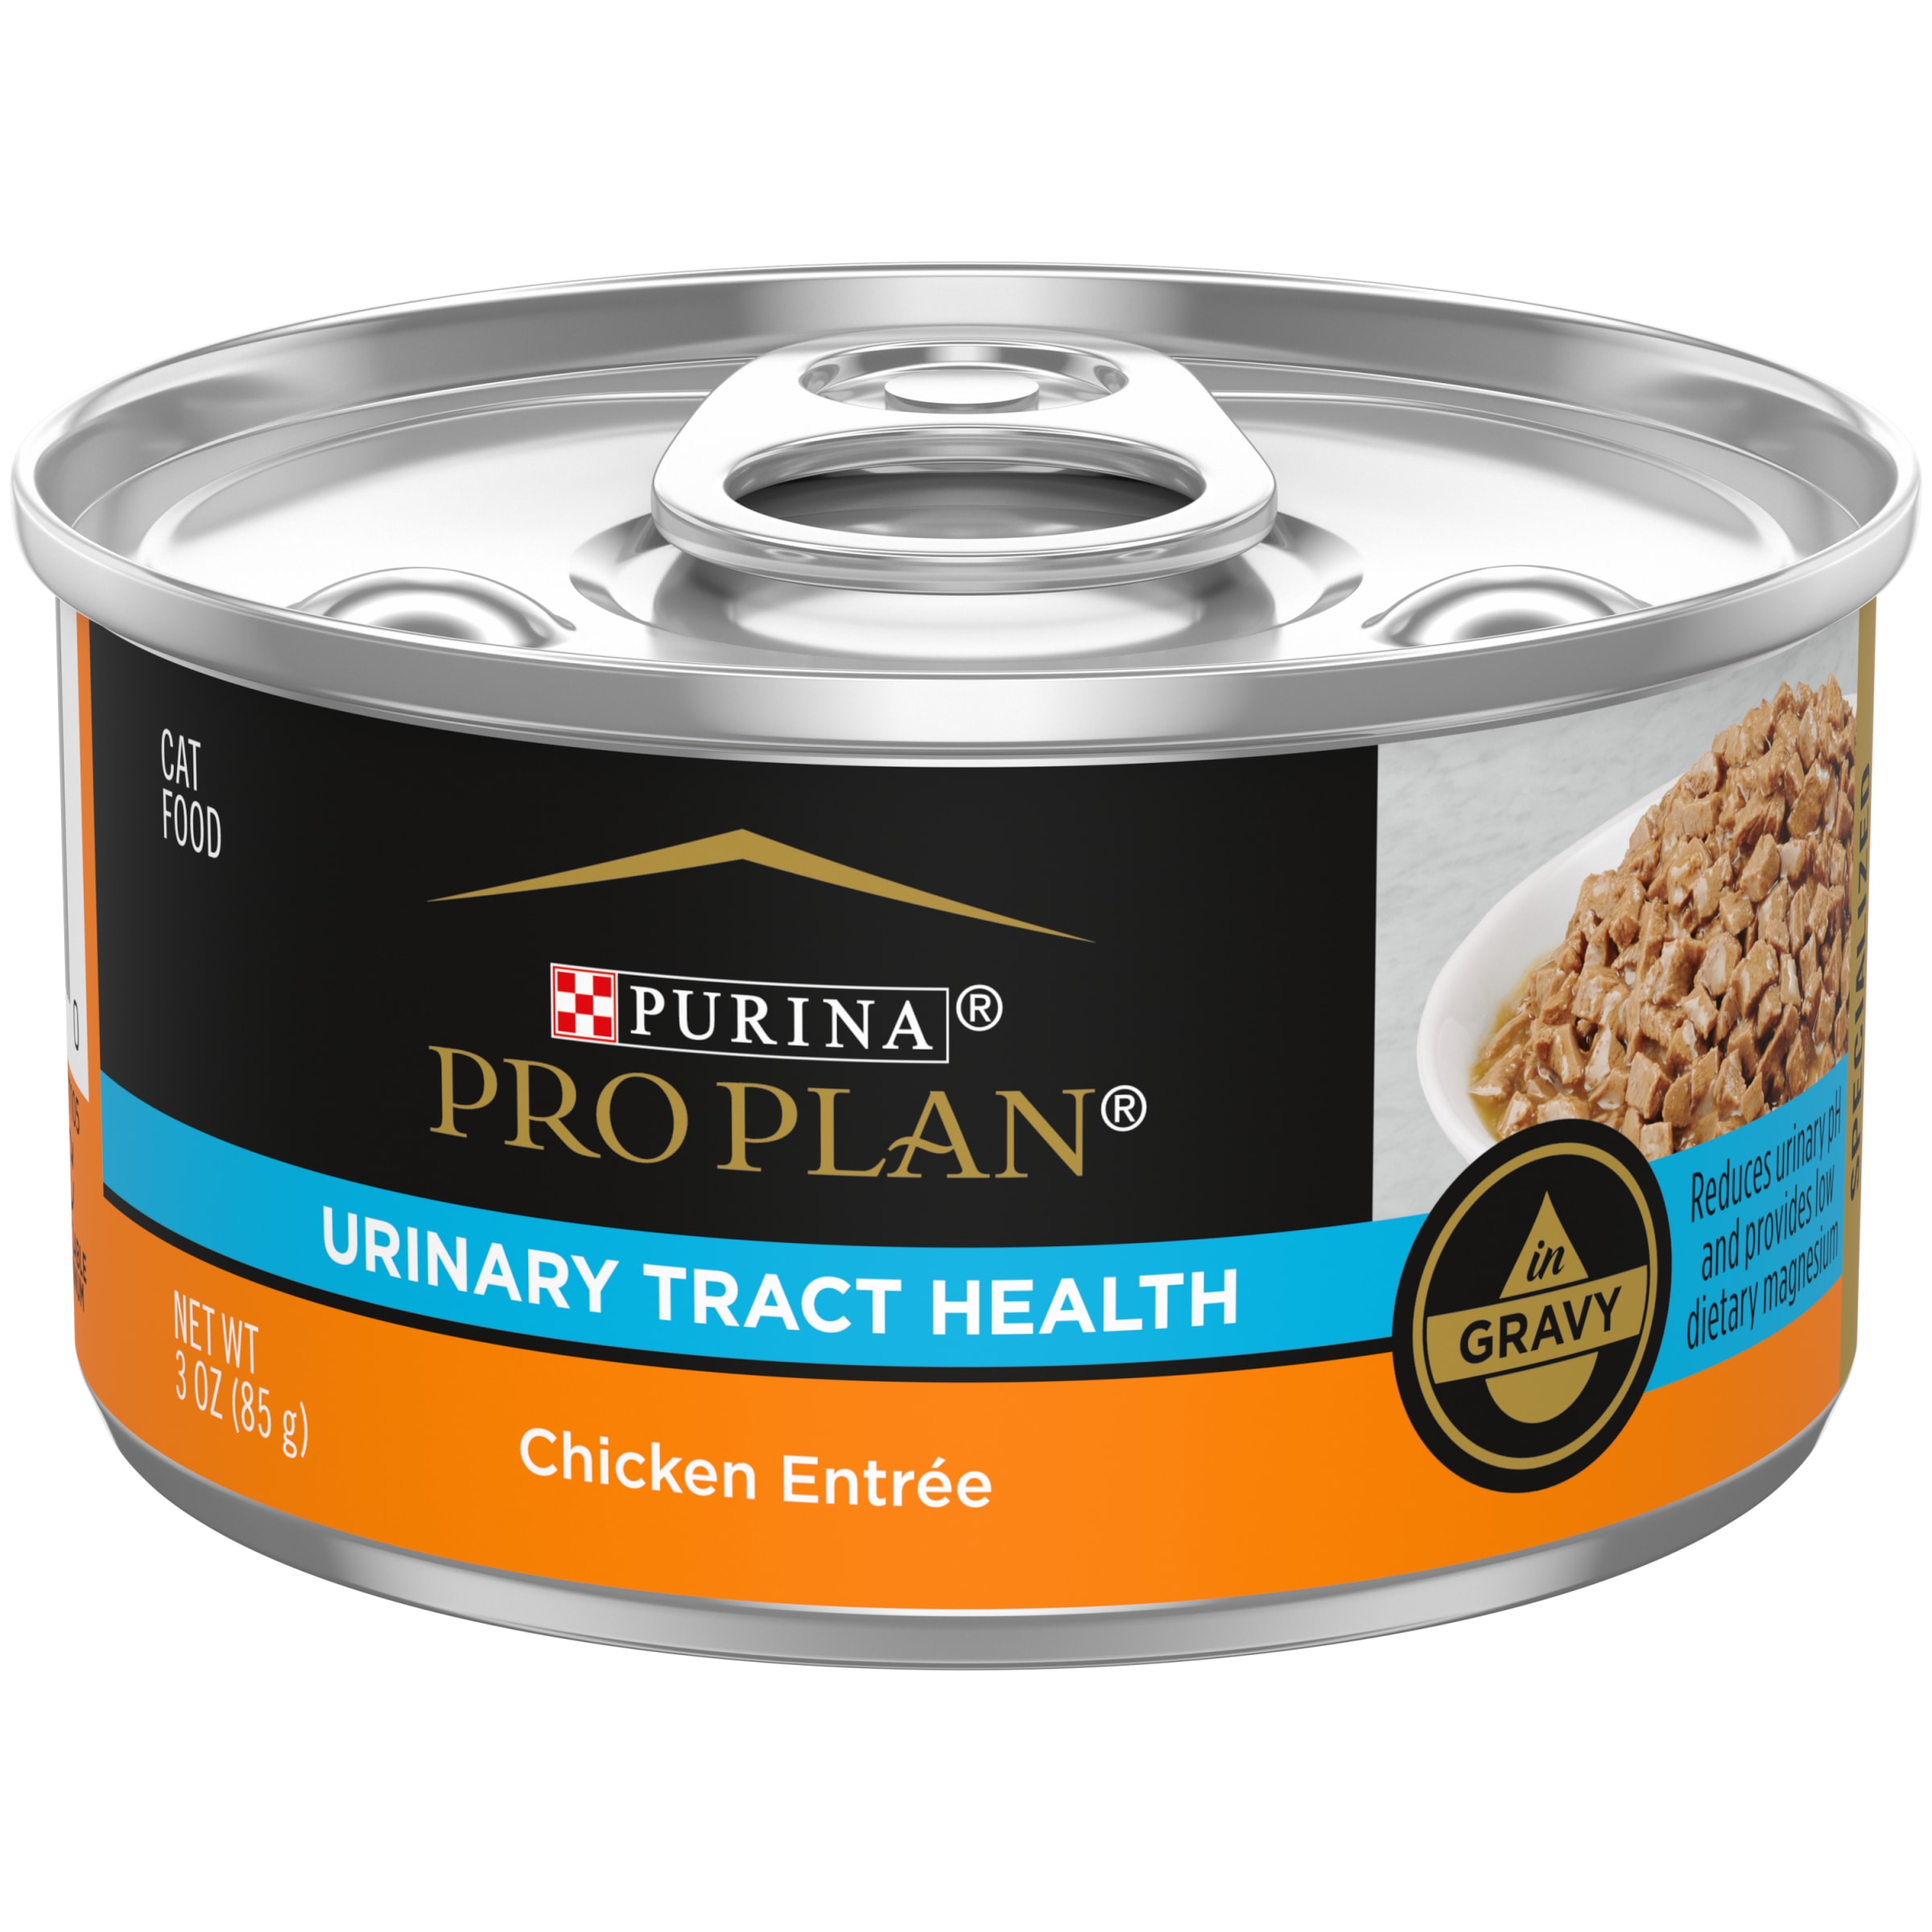 Purina Pro Plan Urinary Tract Health Wet Cat Food Chicken, 3 oz Cans (24 Pack) - image 1 of 9